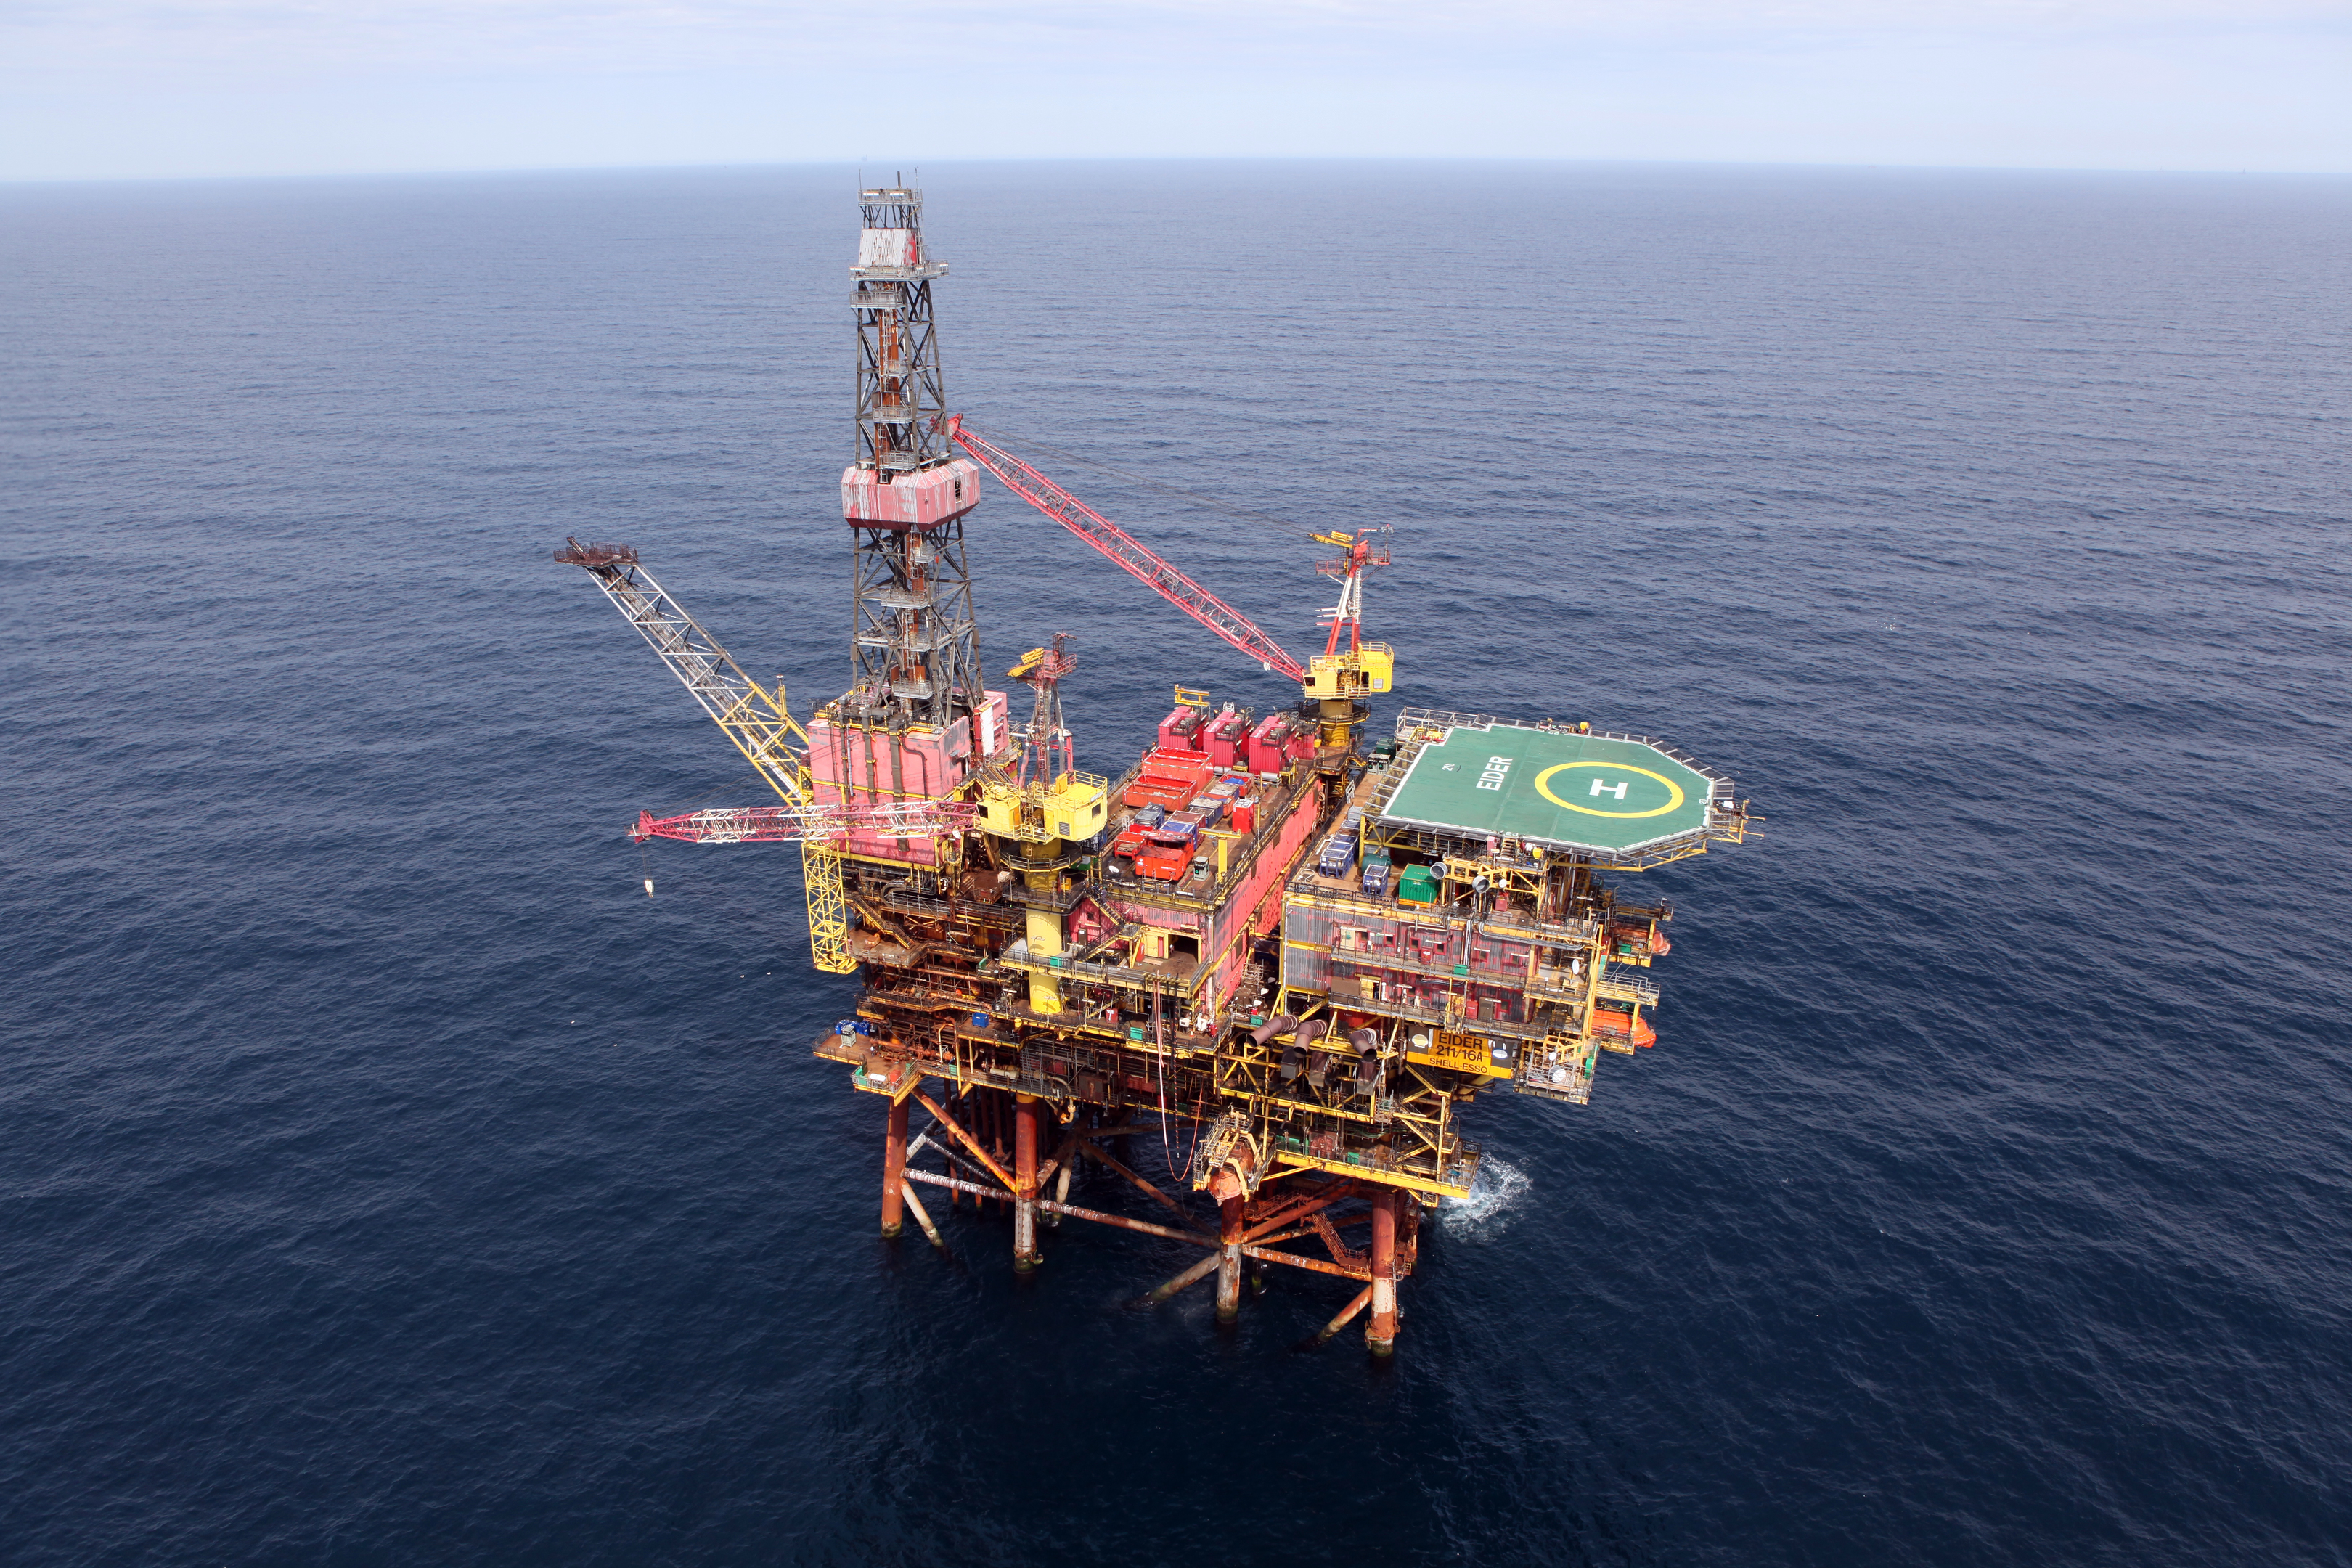 Taqa's Eider platform will be switched to utility mode